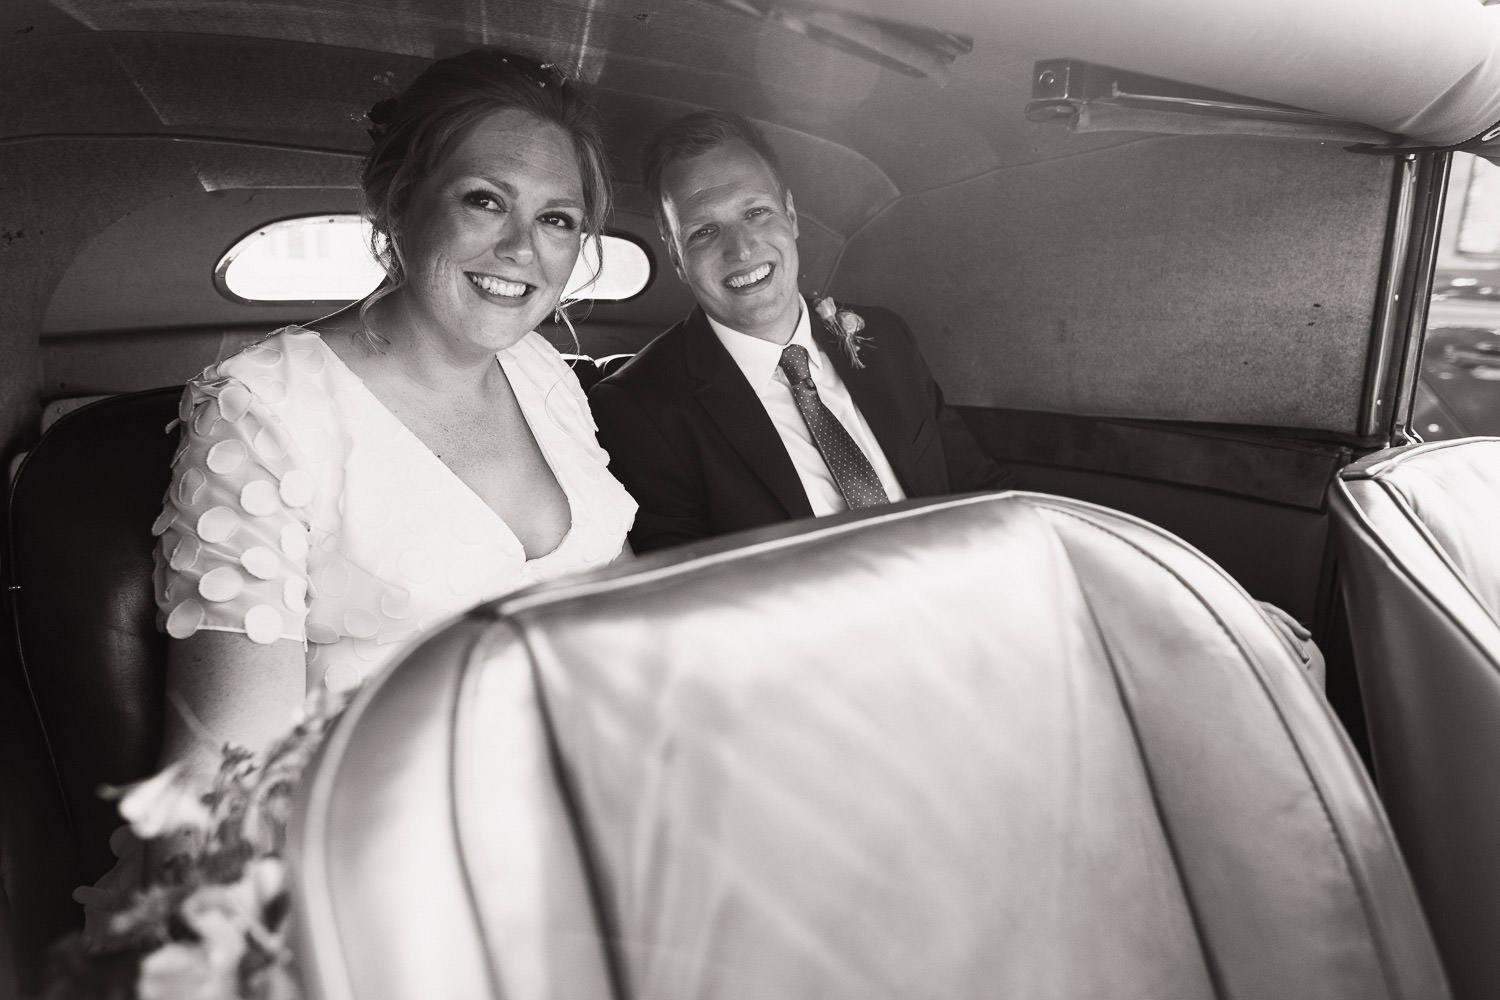 A bride and groom smile at the camera in the back of a car.
After their wedding at the church in Thaxted.
Vagabond wedding dress called Anouk, Circle motif chiffon A line gown with deep V neckline with buttons in the front.